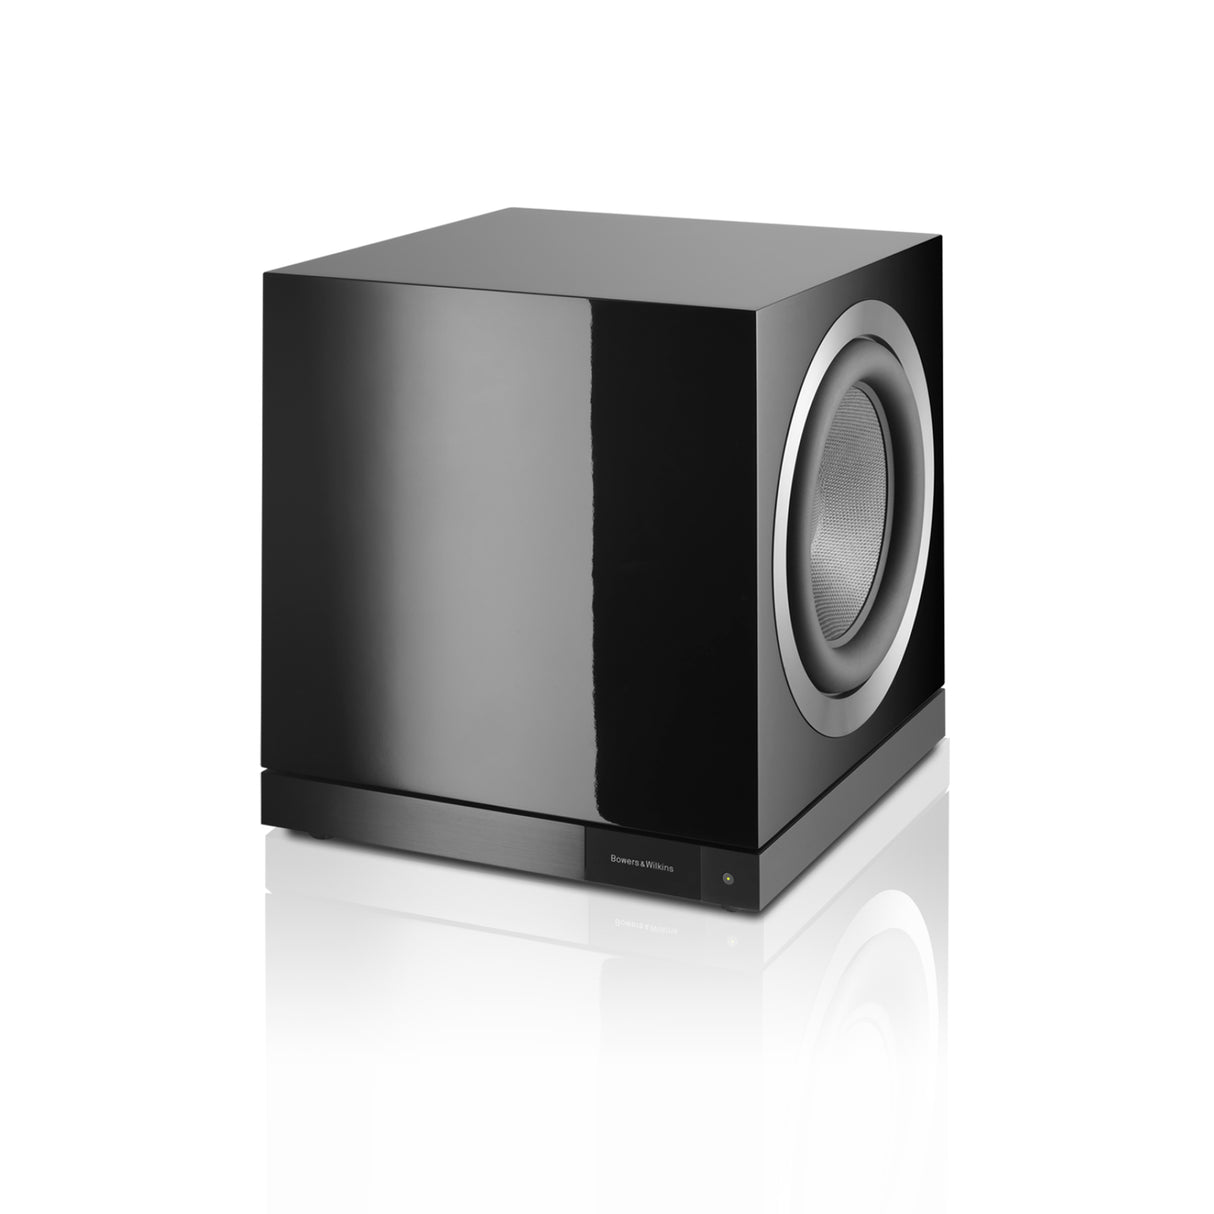 Bowers & Wilkins DB2D - App Controlled 10 Inch Powered Subwoofer